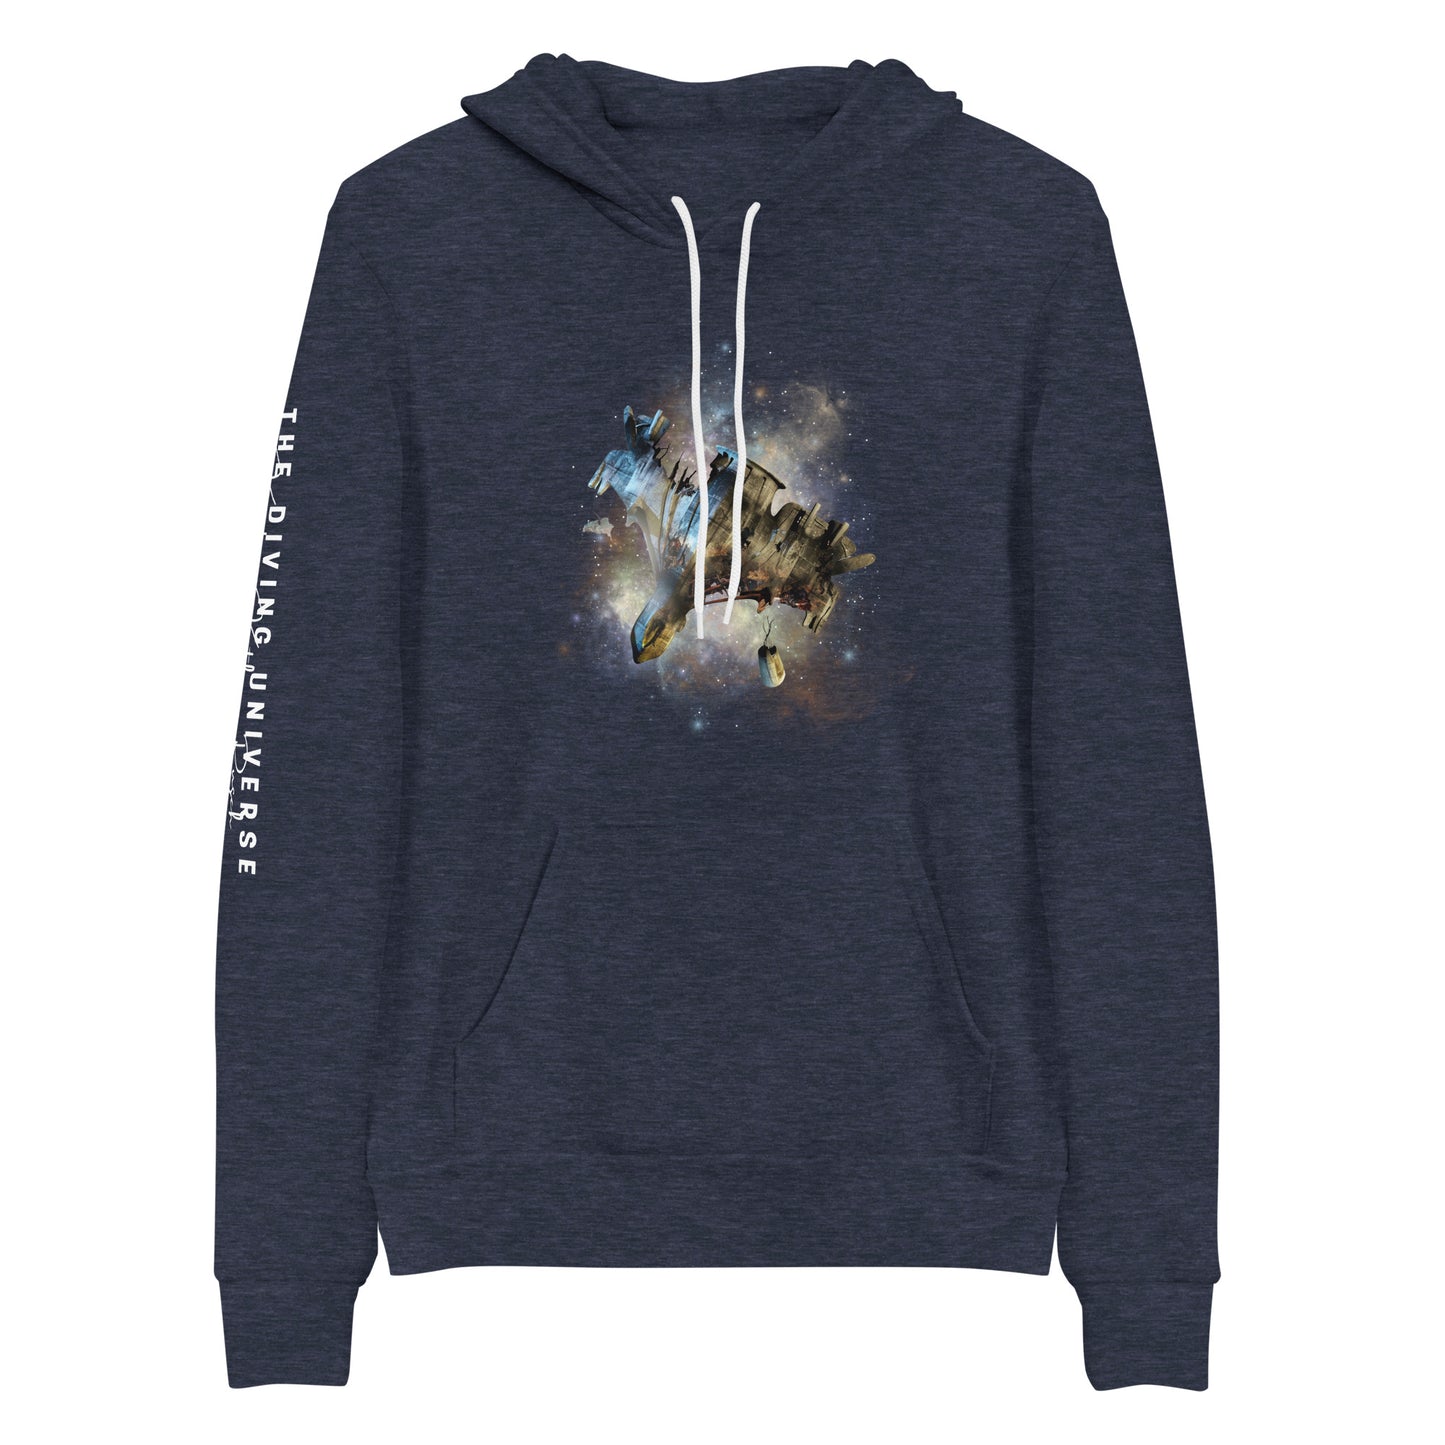 SPACESHIP WRECK Hoodie  - The Diving Universe by Kristine Kathryn Rusch